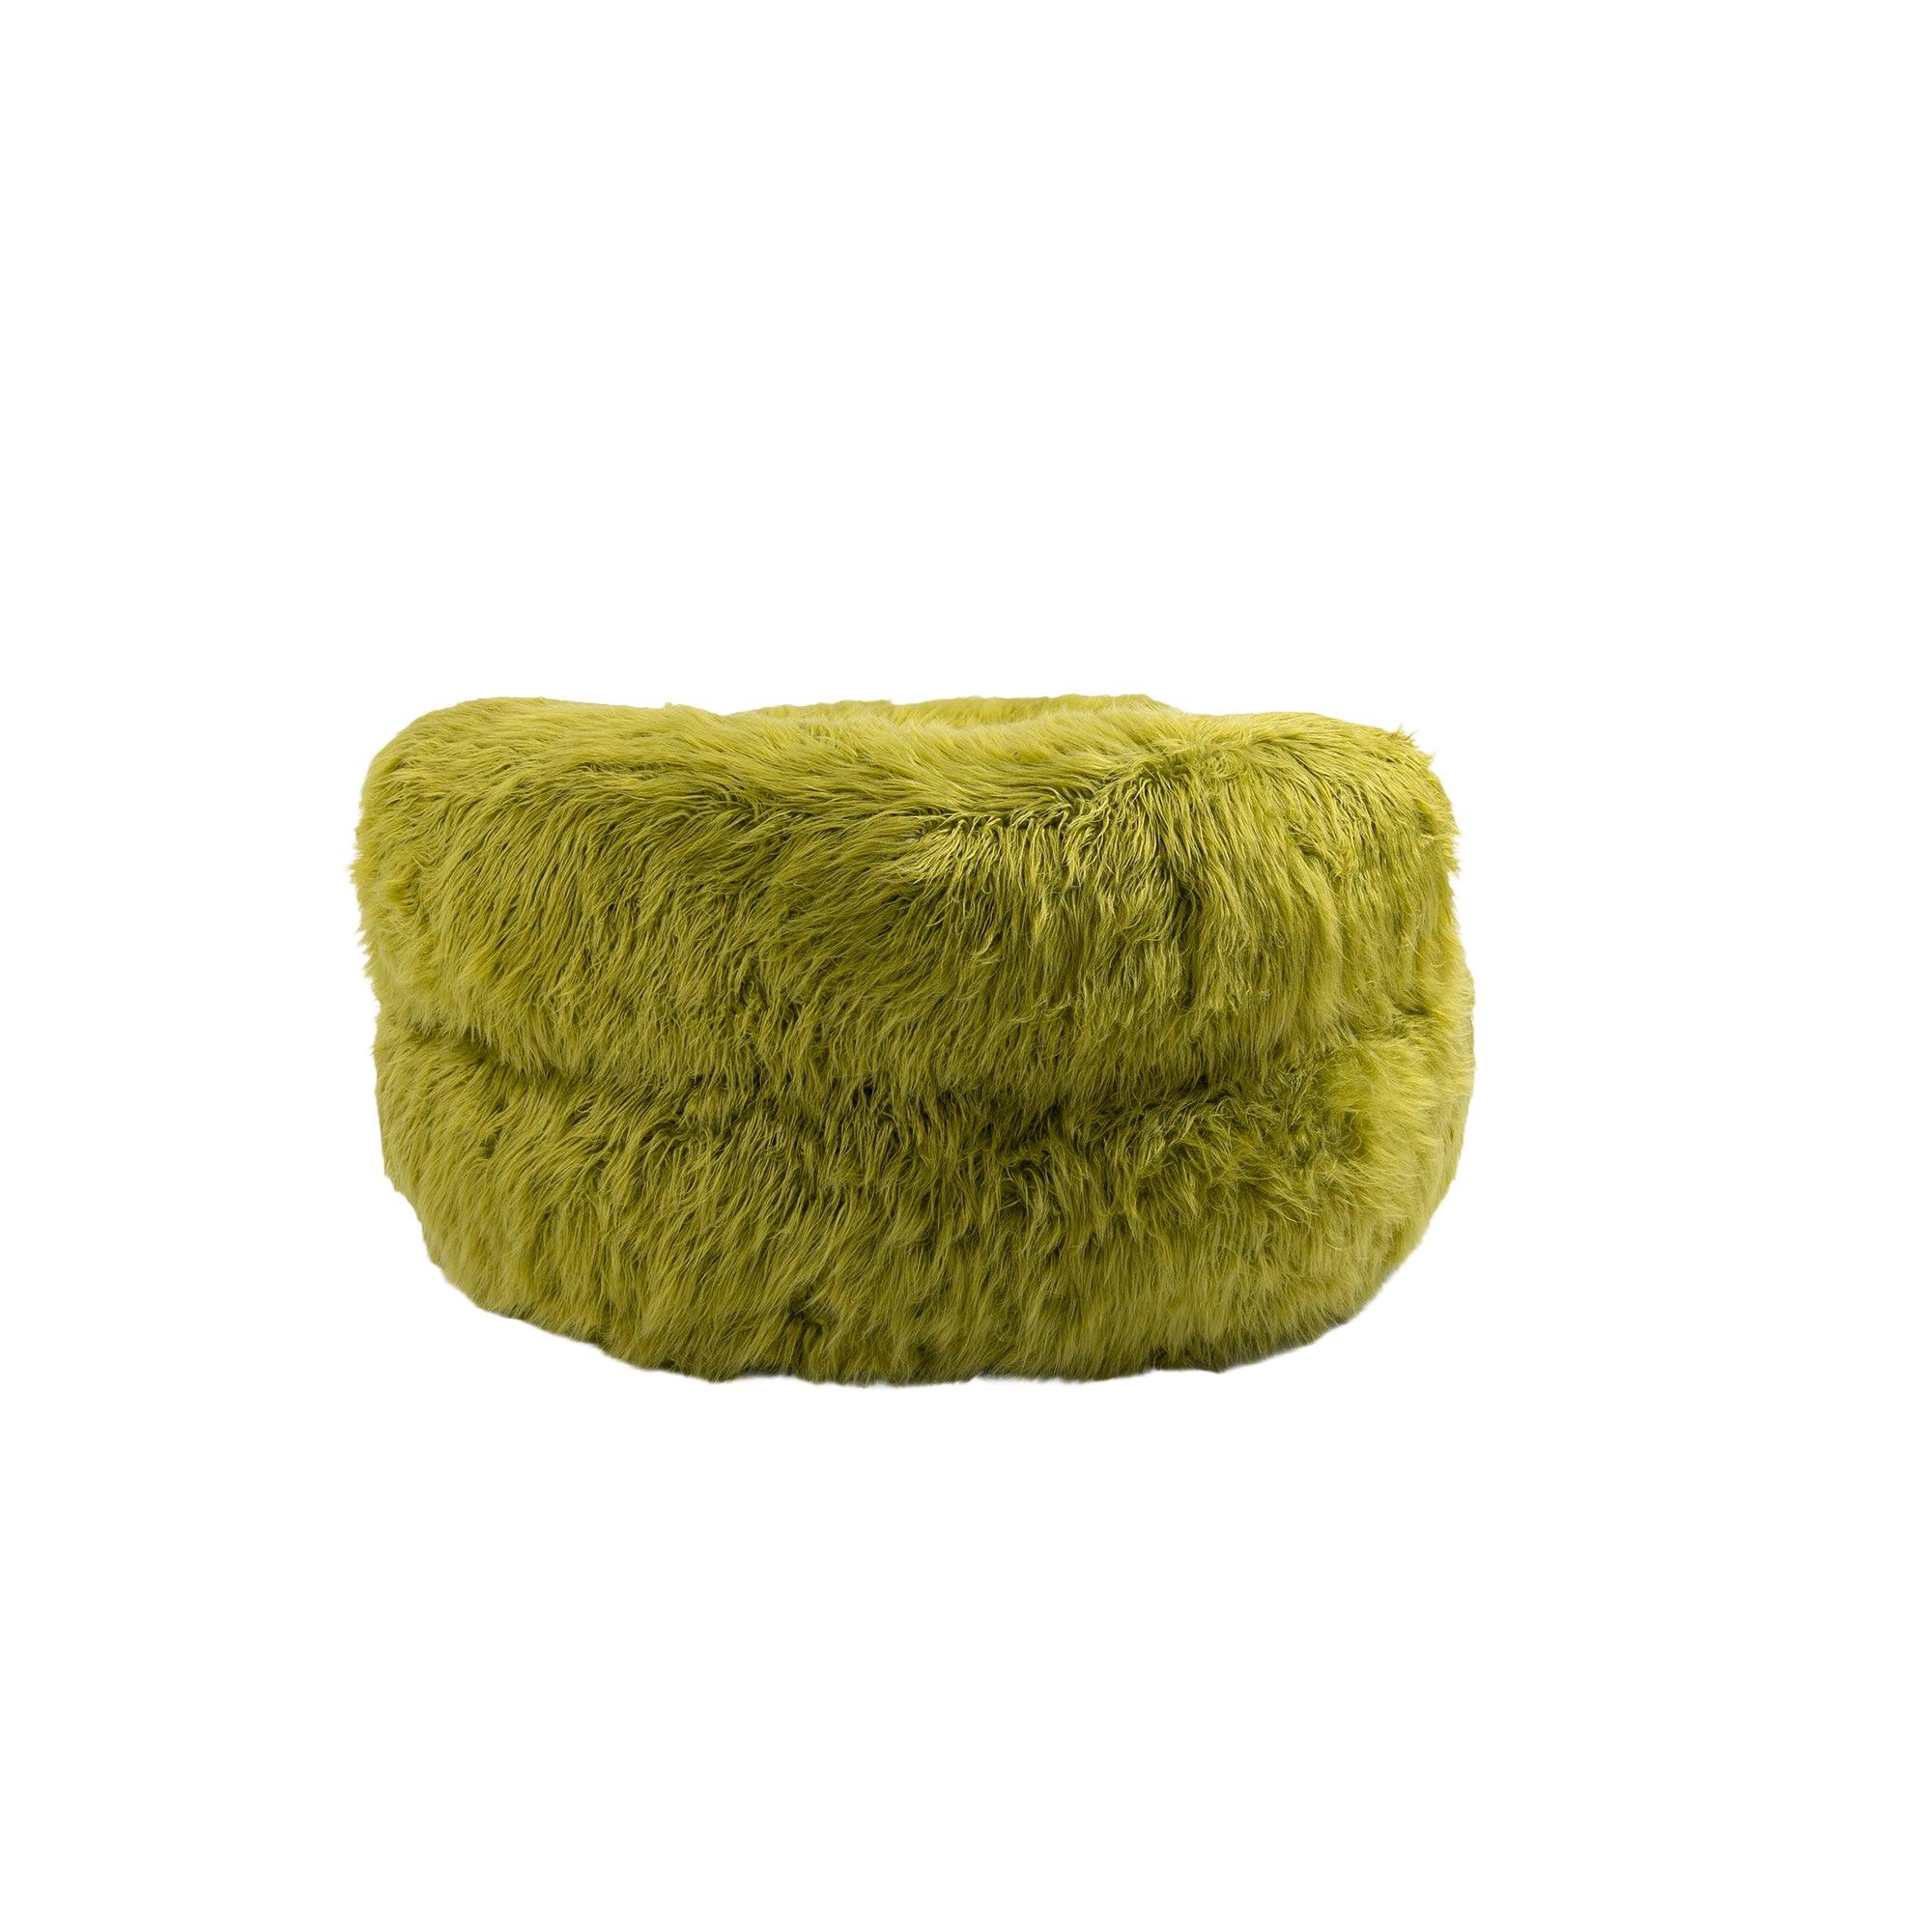 Gramanda 2-In-1 Bean Bag Chair Faux Fur Lazy Sofa & Ottoman Footstool For Adults And Kids - Olive